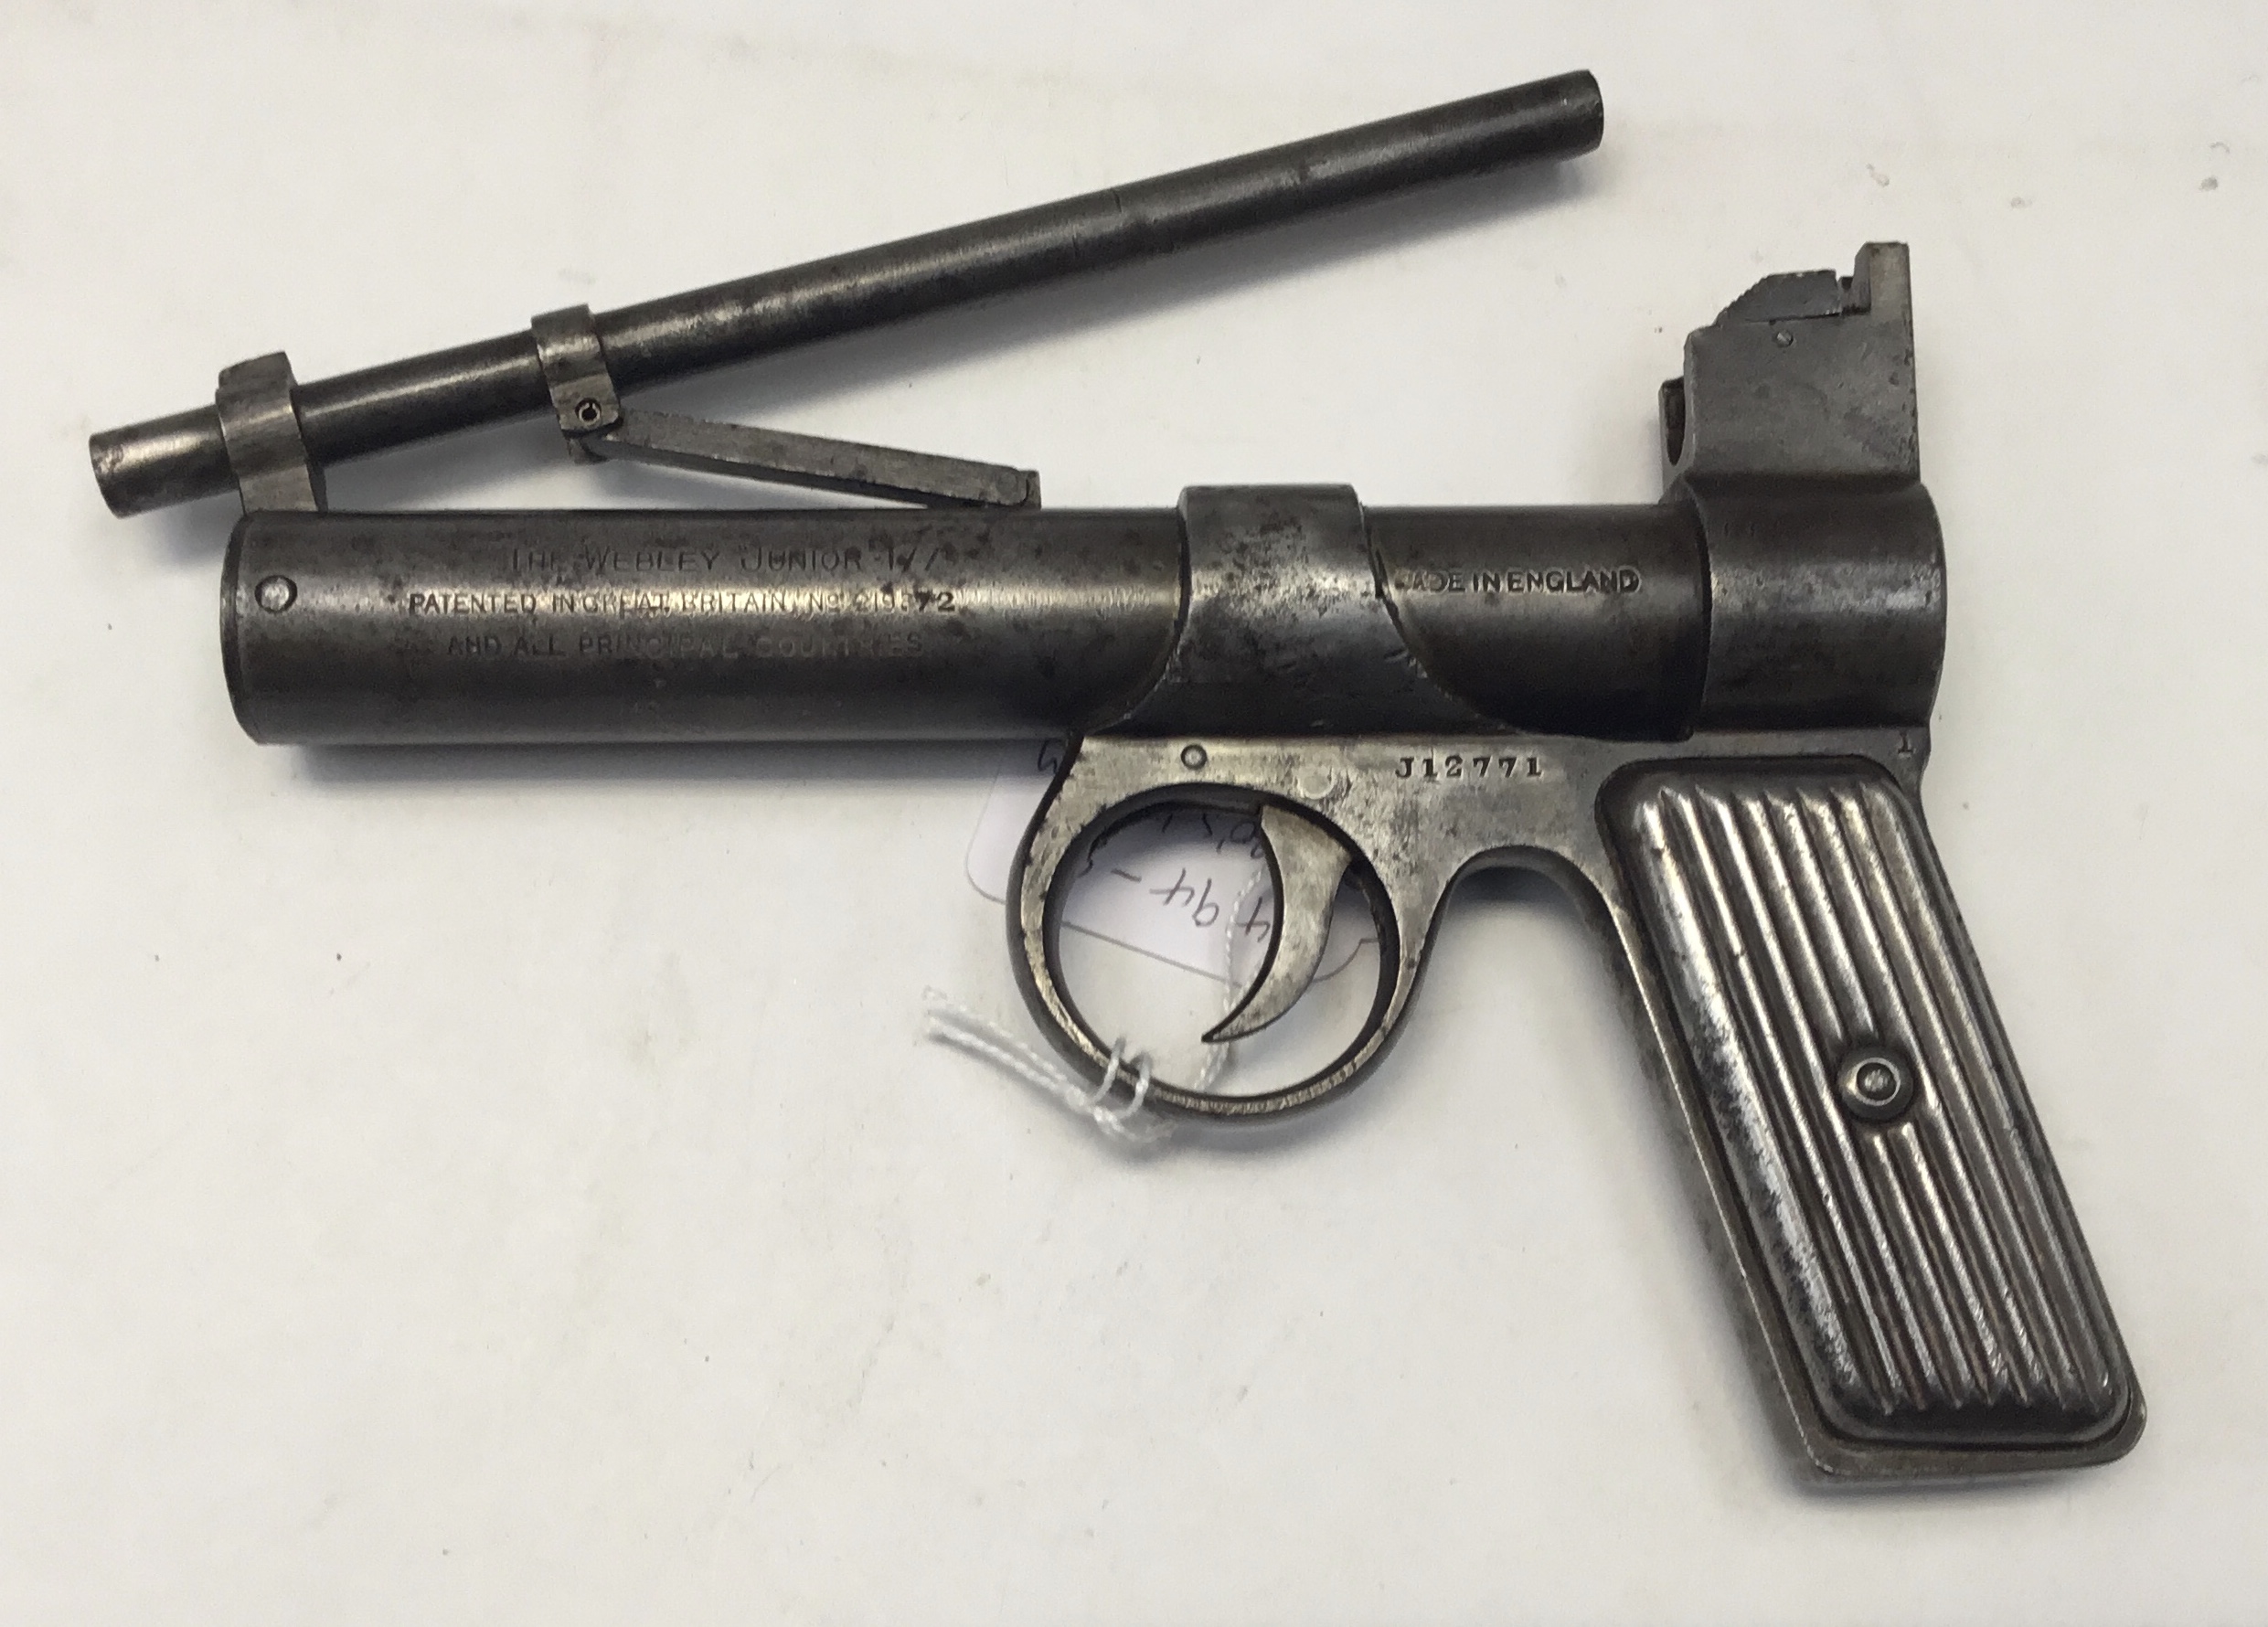 Pre-war Webley Junior over-lever air pistol in .177 smooth bore. Very tidy example of this